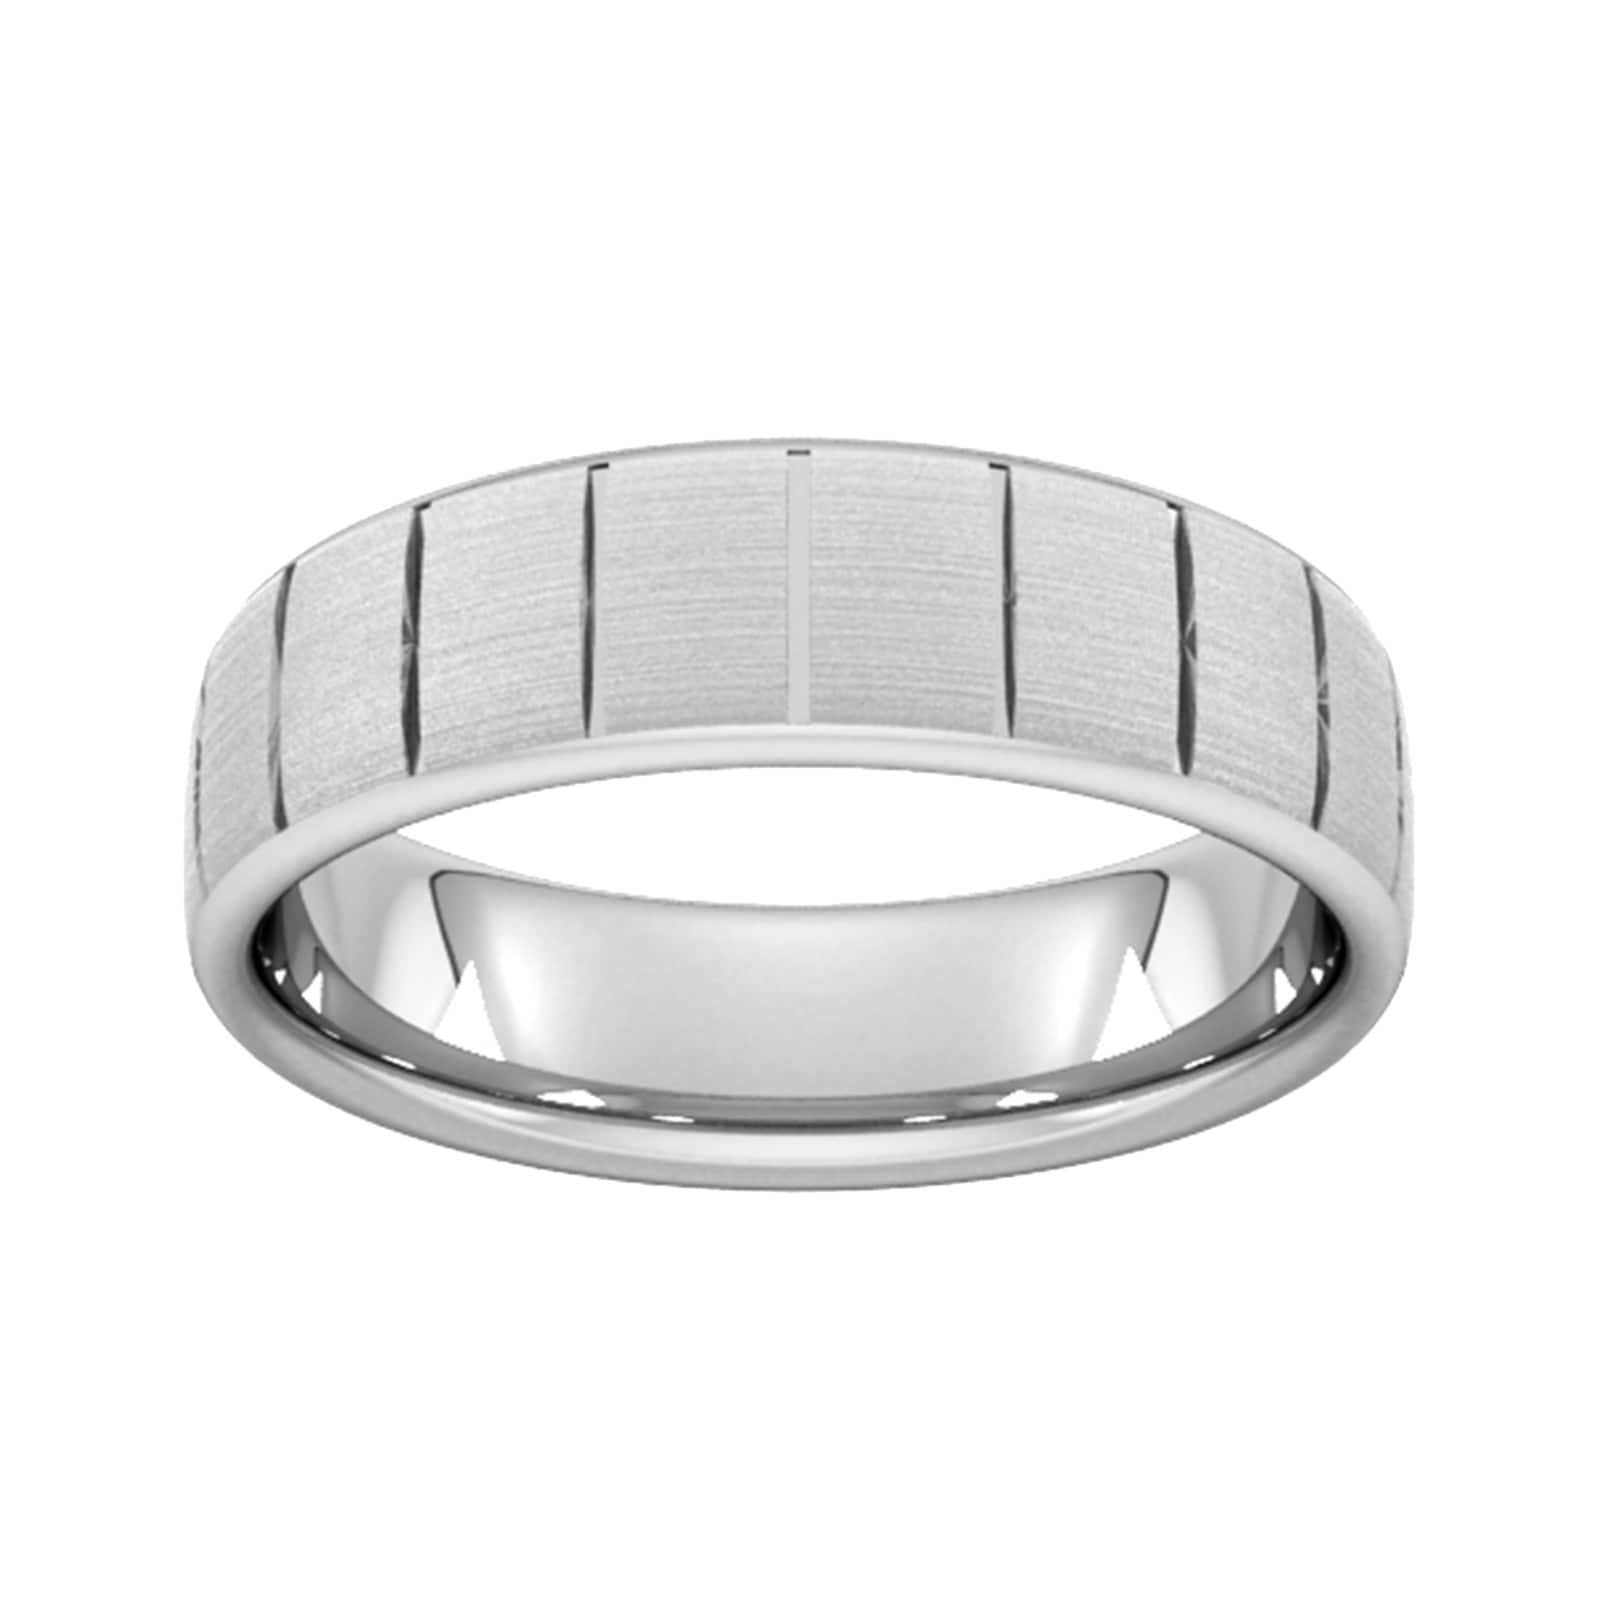 6mm Slight Court Heavy Vertical Lines Wedding Ring In 9 Carat White Gold - Ring Size J